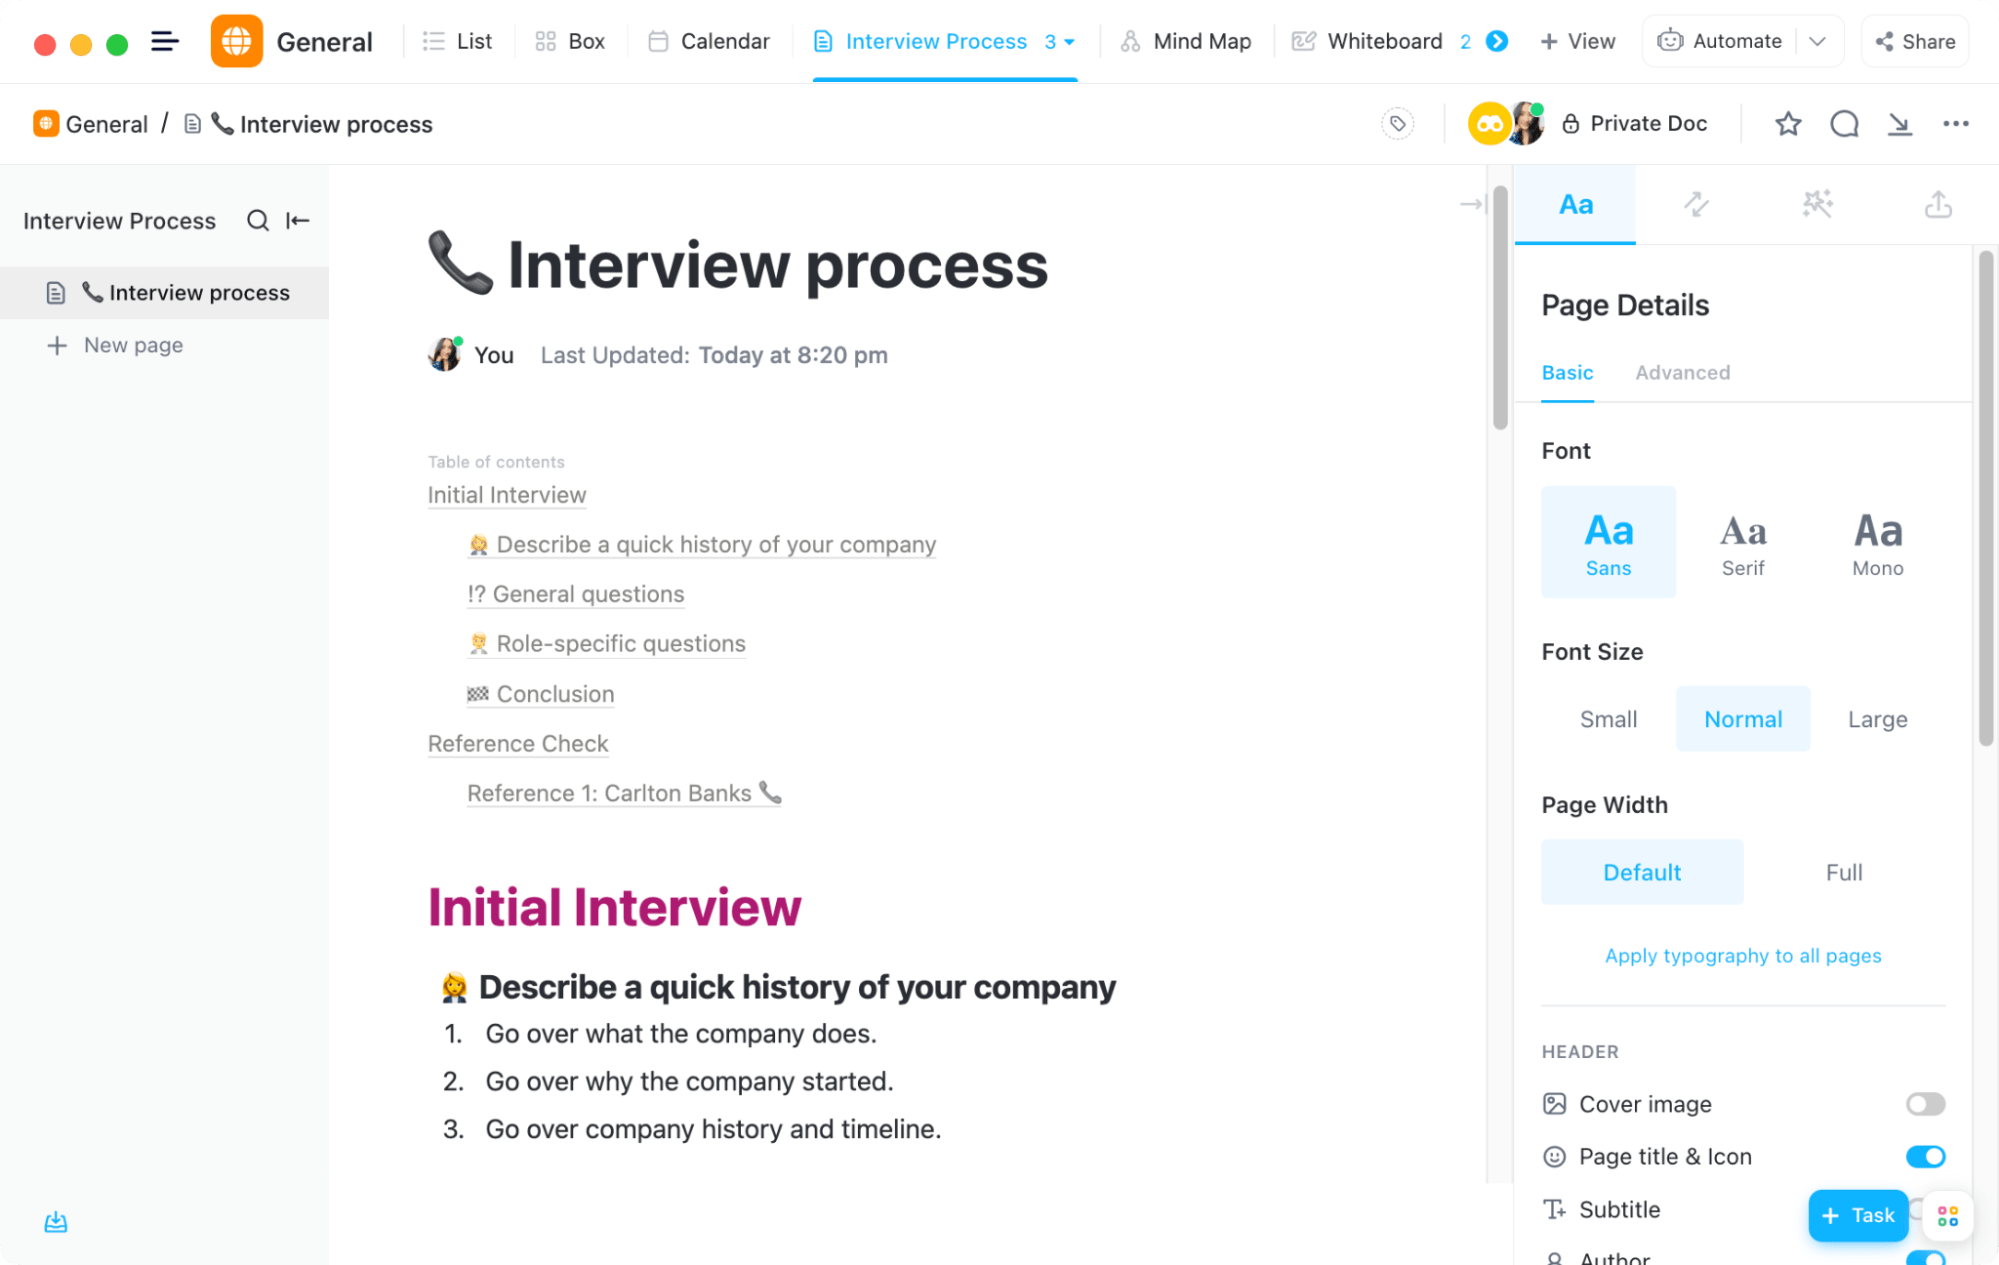 Maximize hiring efficiency by asking the right questions in the right order with ClickUp's Interview Process Template to easily vet candidates and find the perfect fit